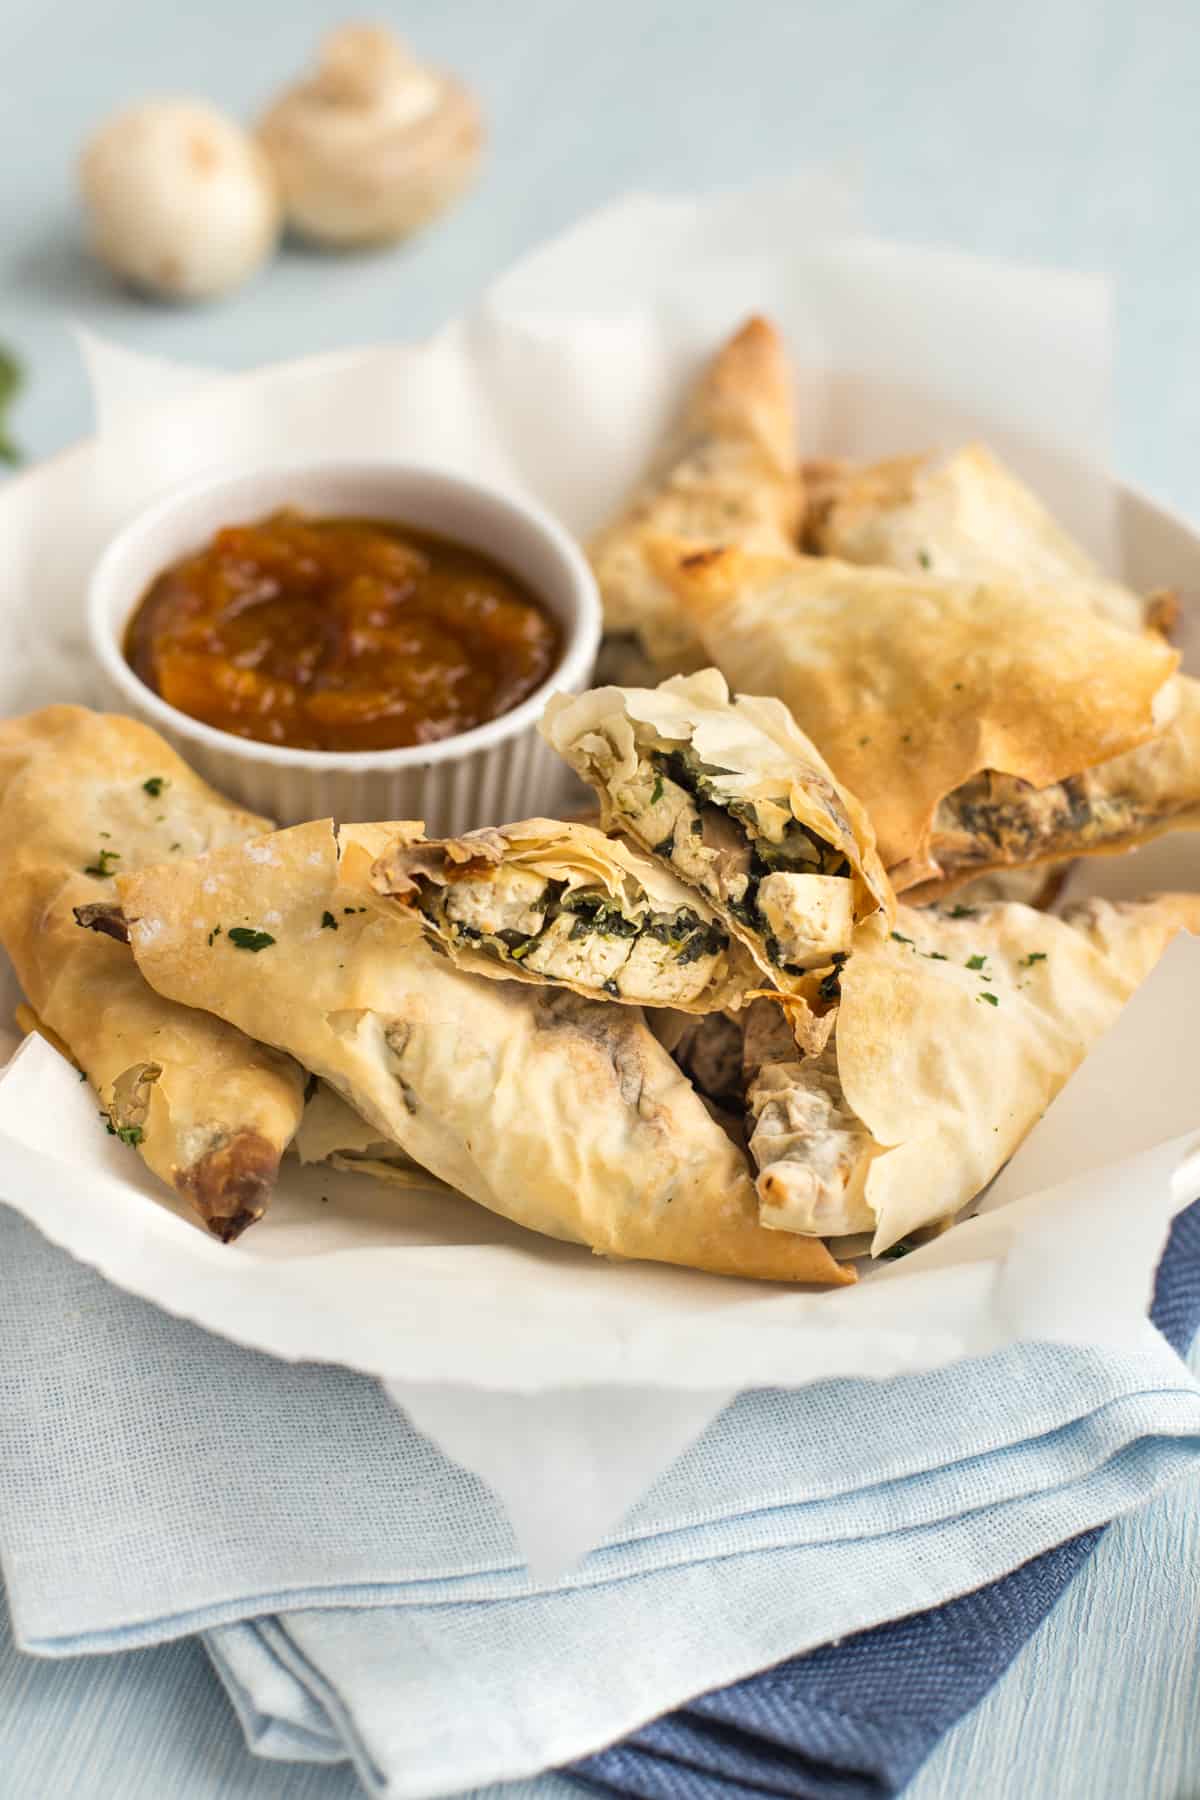 A bowlful of crispy homemade samosas, with one torn open to show the tofu and spinach filling.